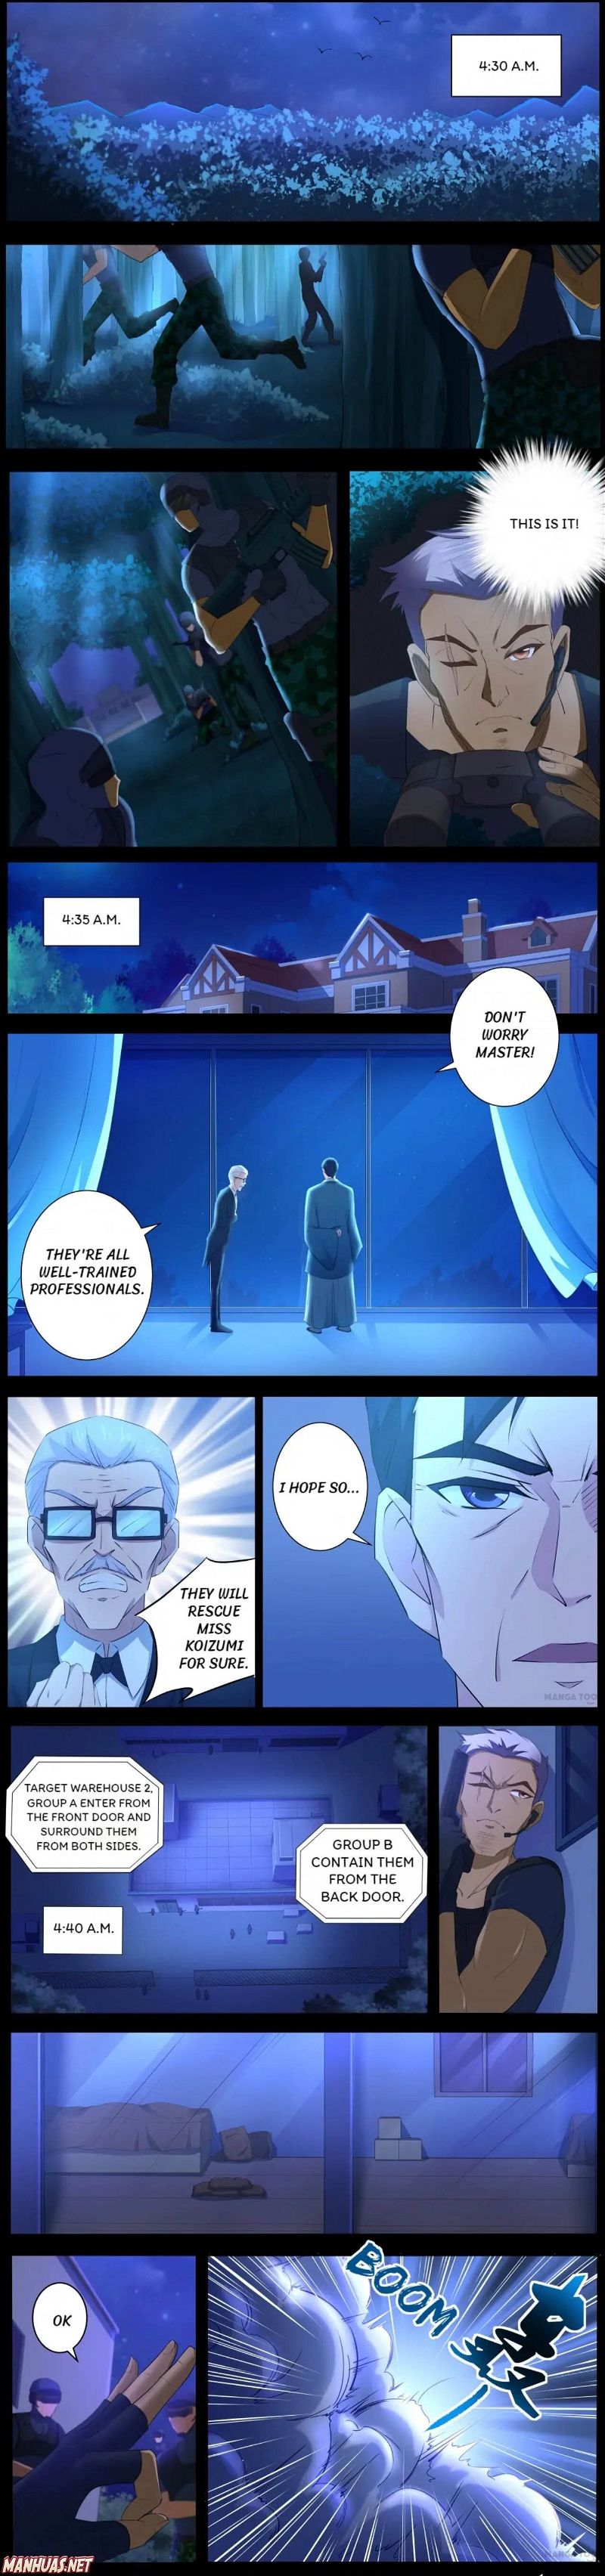 High School Taoist Chapter 71 page 1